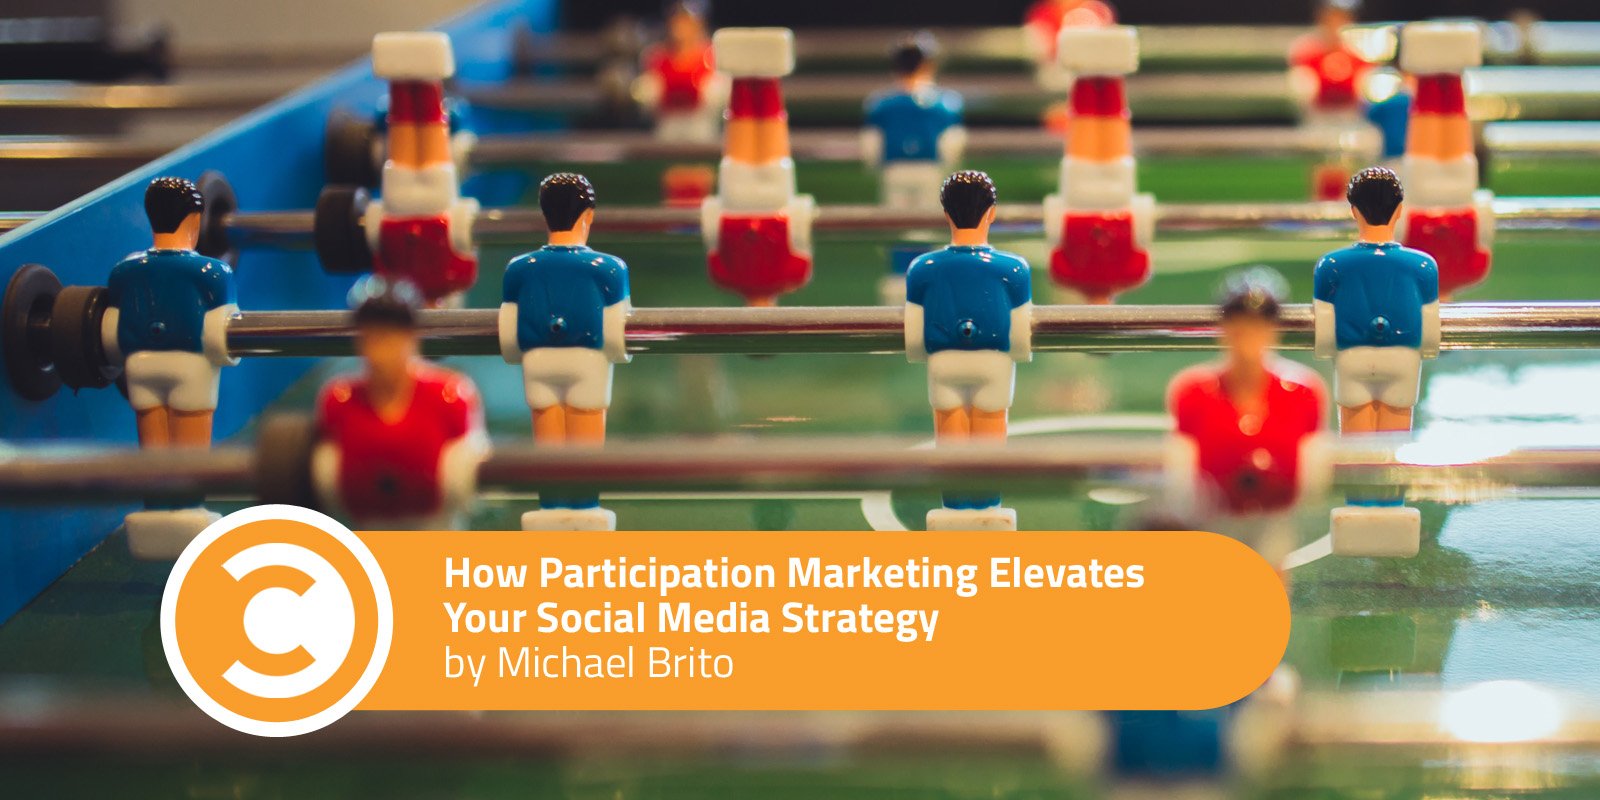 How Participation Marketing Elevates Your Social Media Strategy